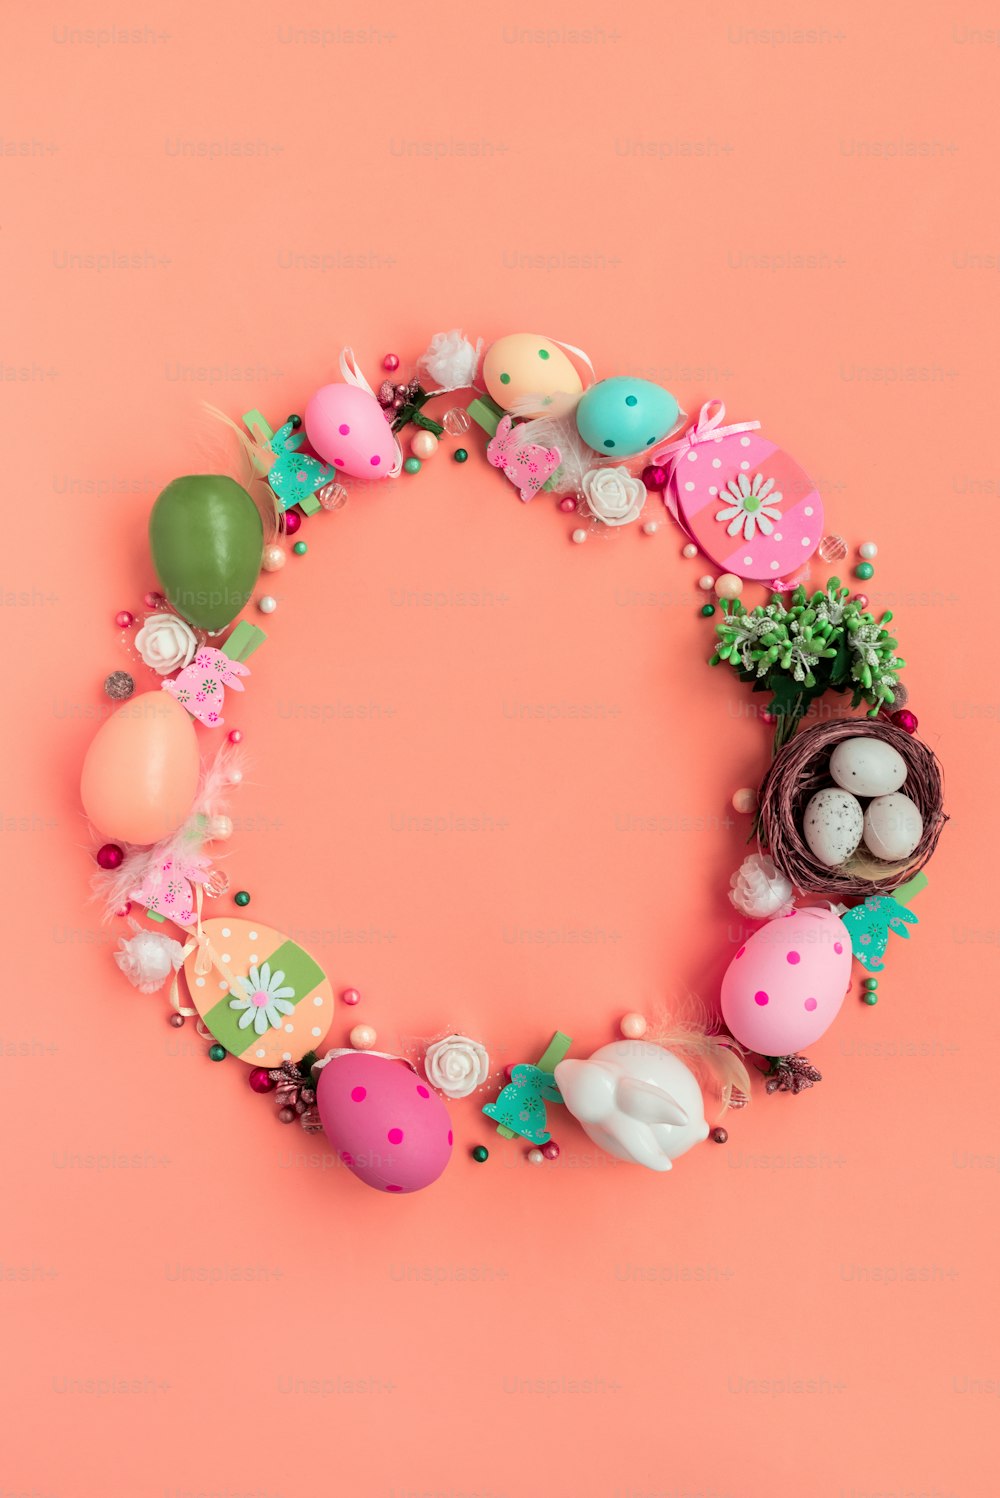 Circle wreath shape made of colorful spring flowers and eggs on pink background.  Easter celebration concept. Top view. Flat lay